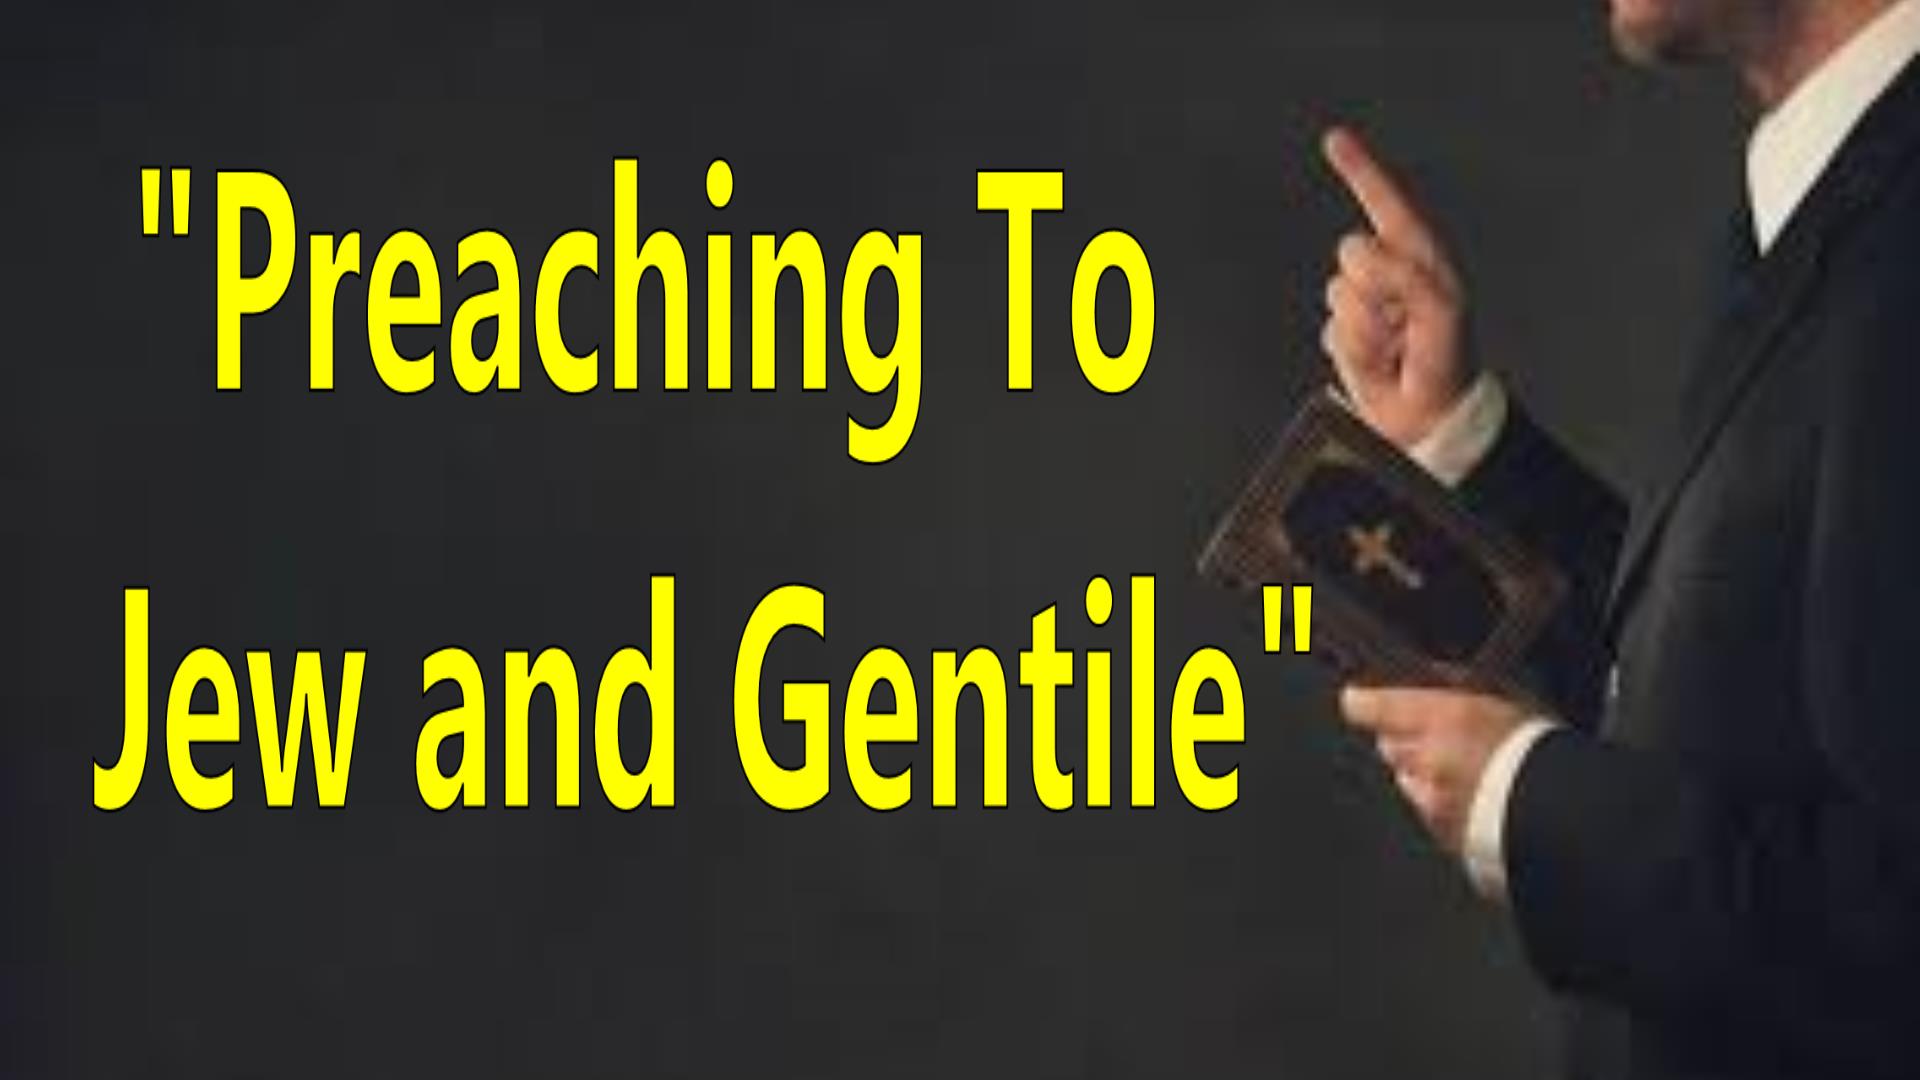 PREACHING TO JEWS AND GENTILES